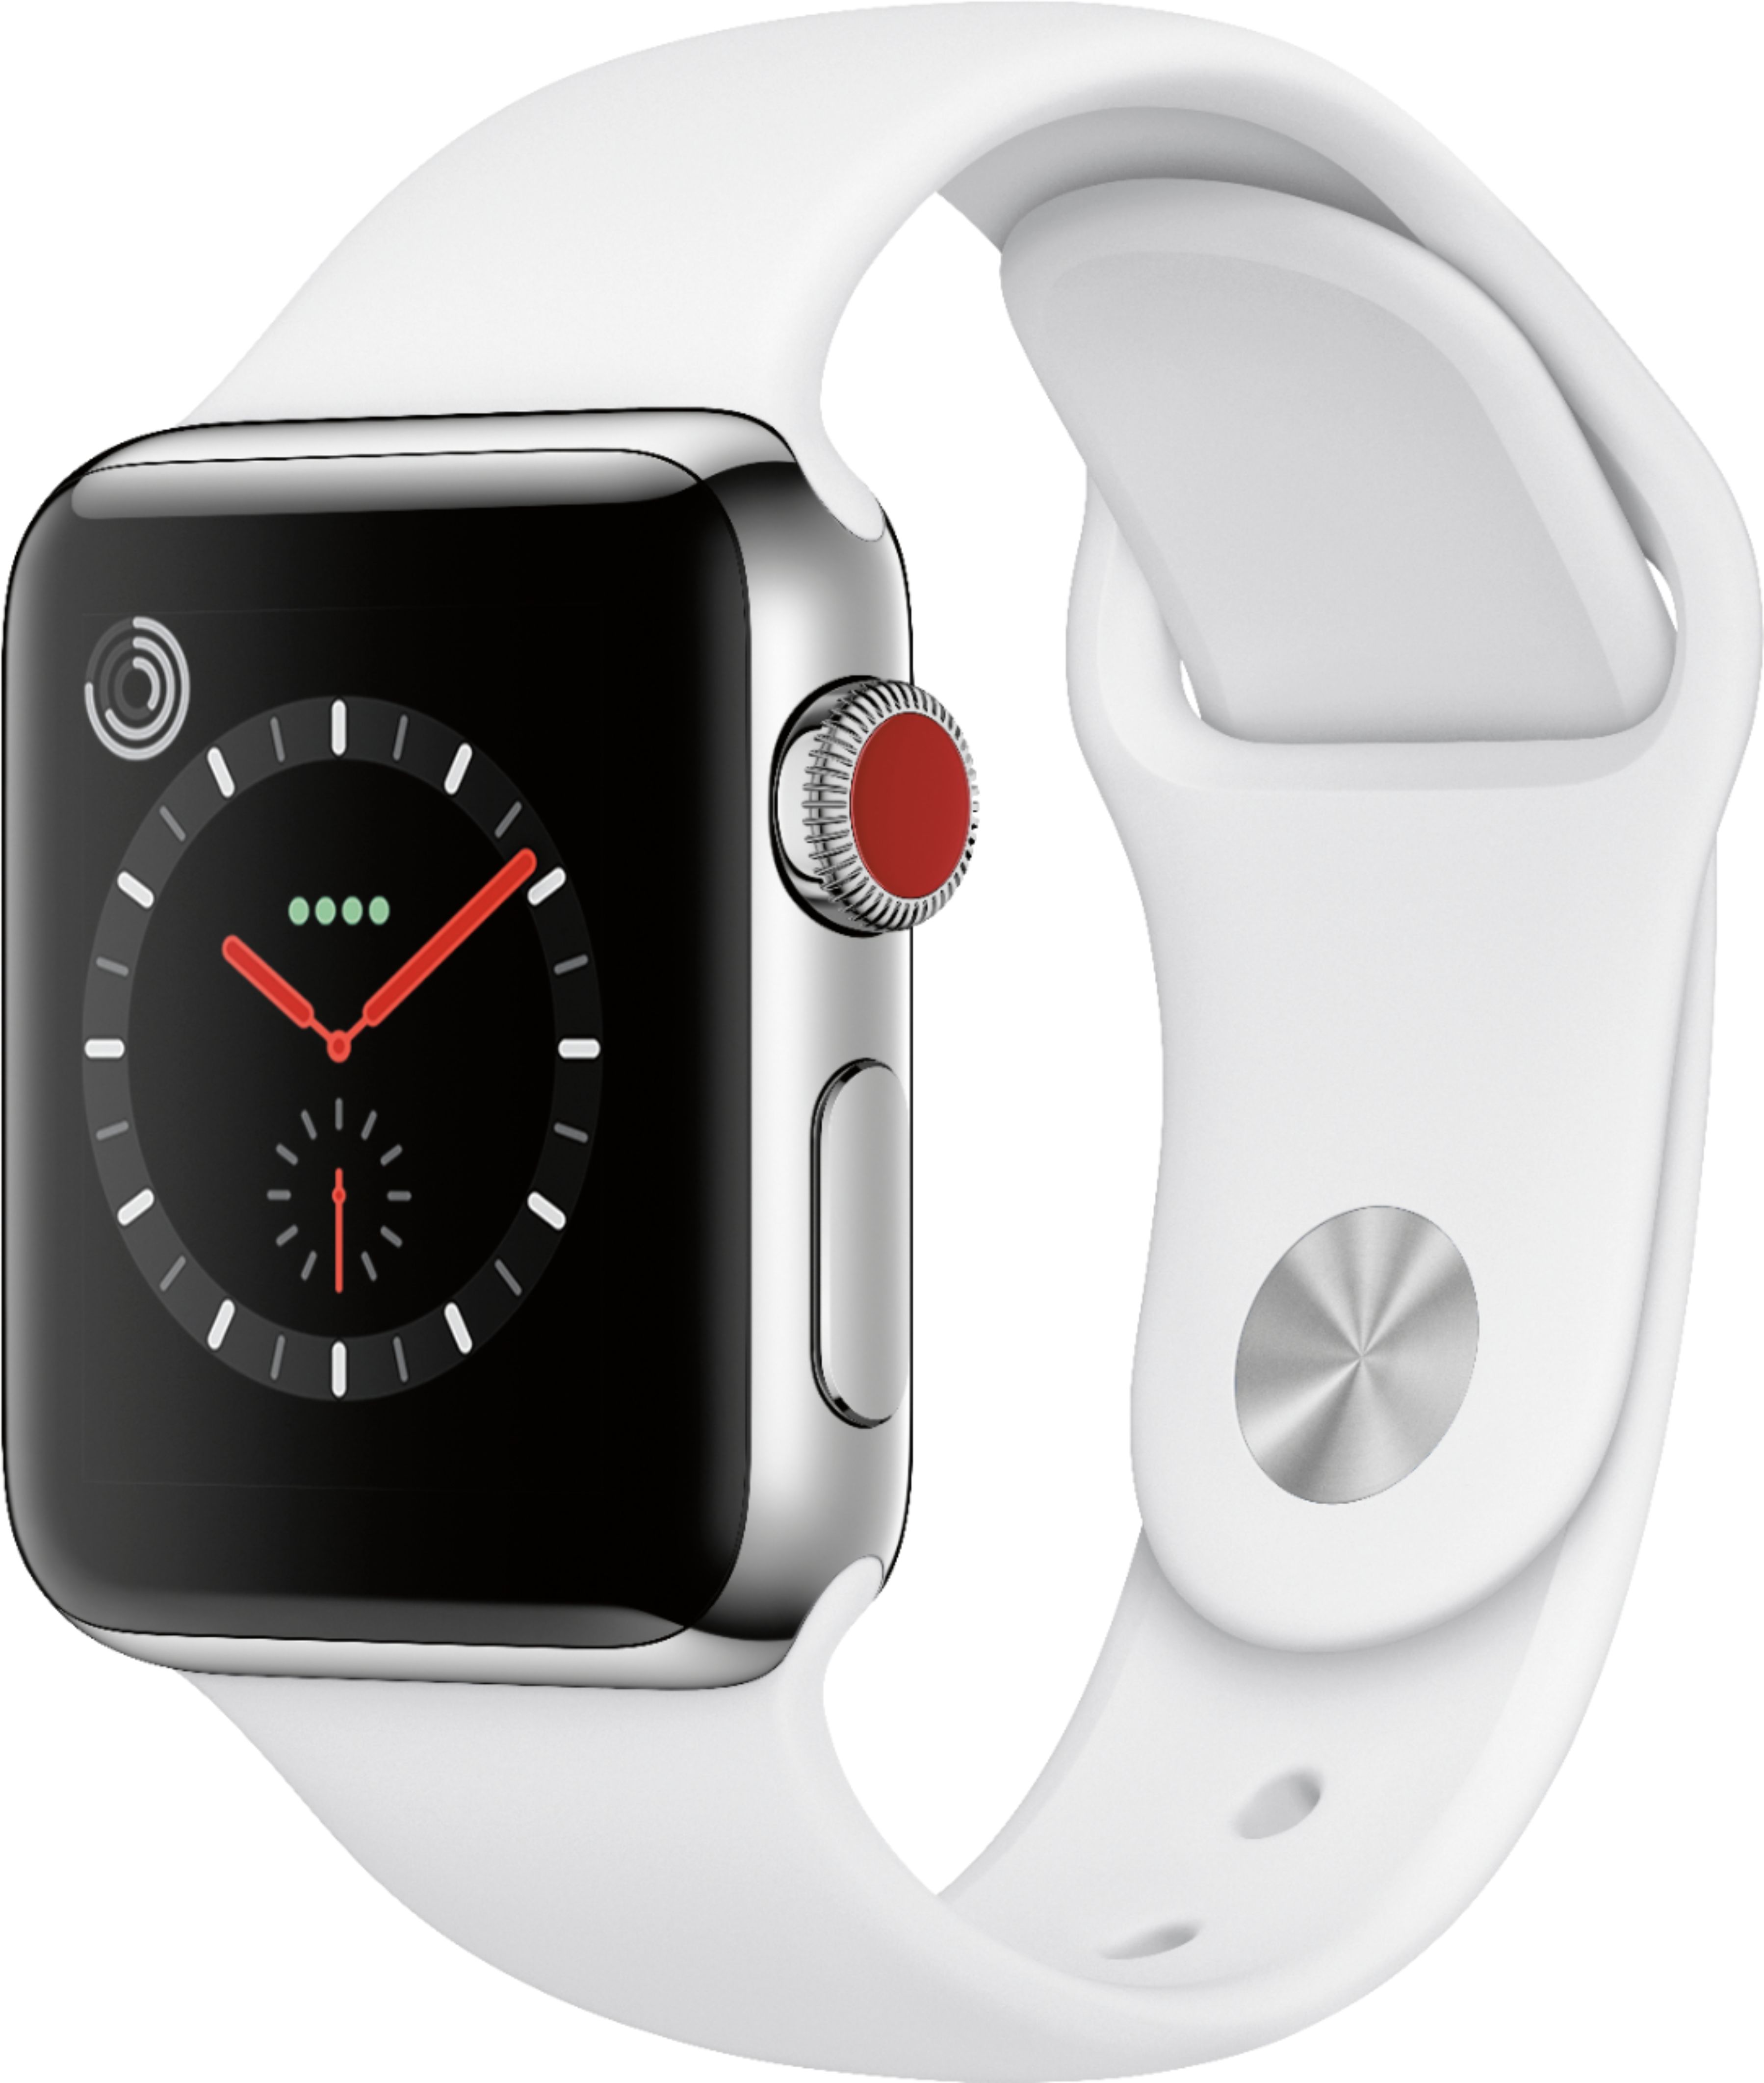 Apple Watch Series 3 (GPS + Cellular) 38mm Stainless - Best Buy